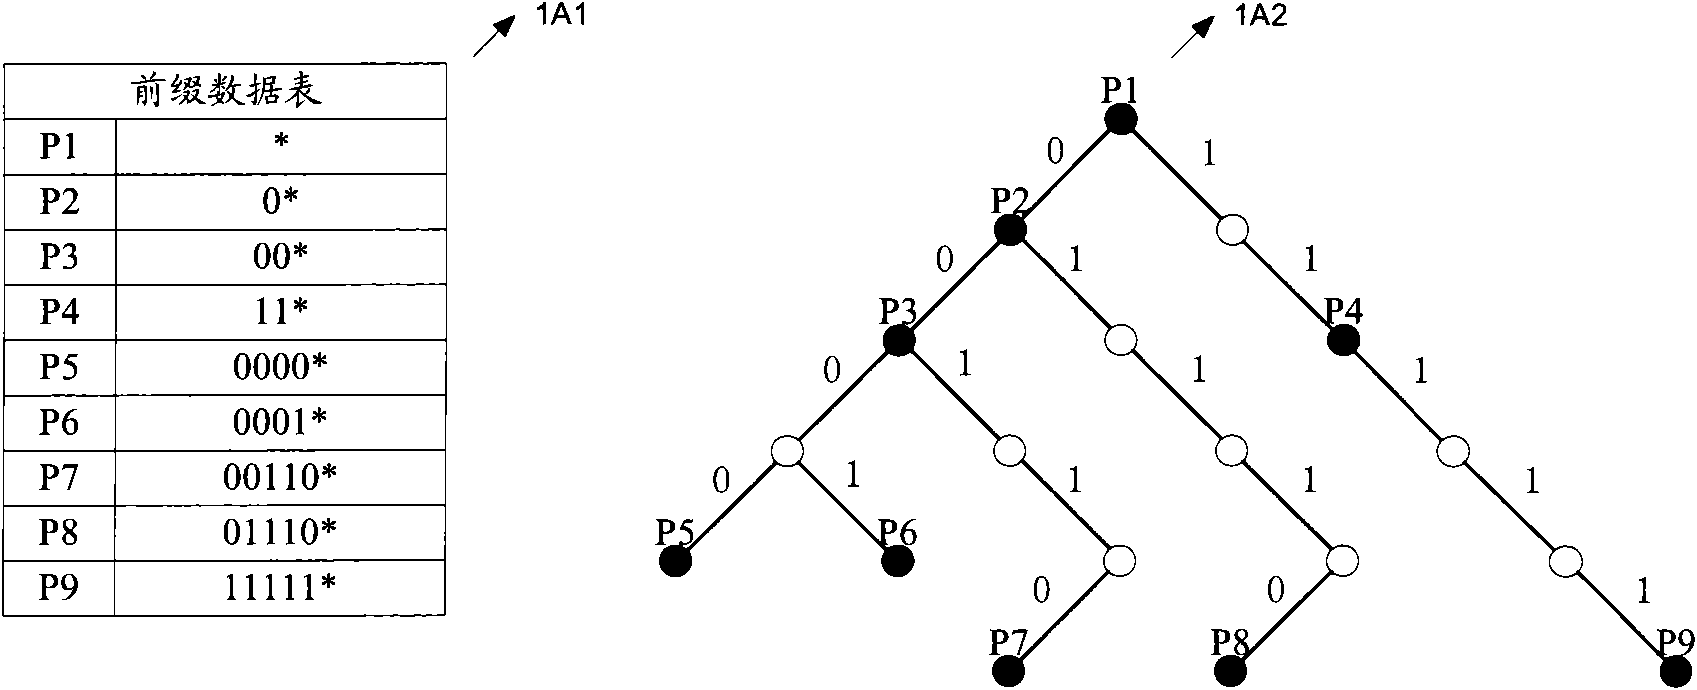 Method and device for matching longest prefix based on tree form data structure